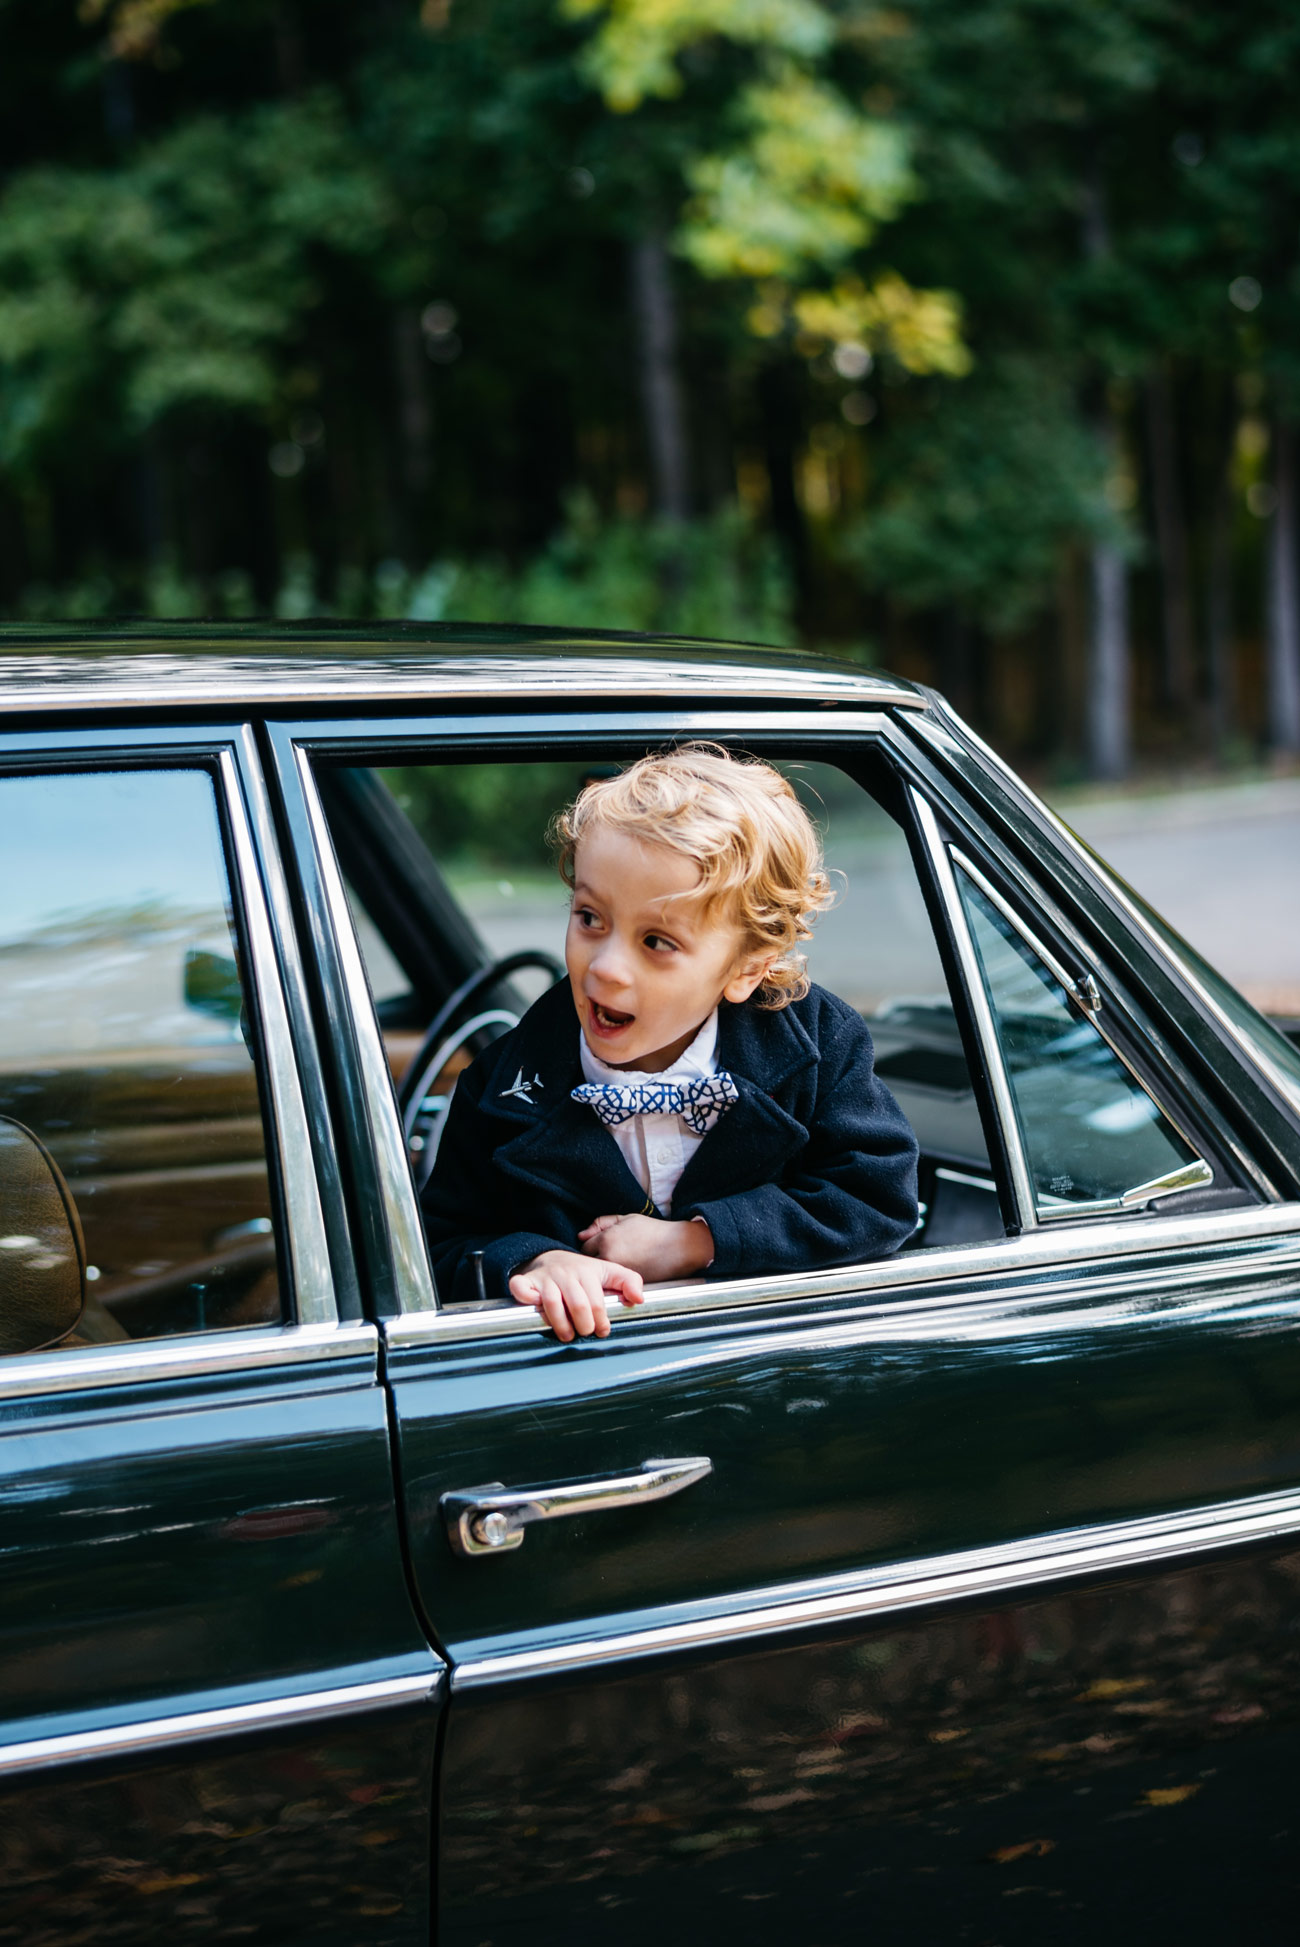 cute kid in car vintage mercedes lifestyle at aquinas college